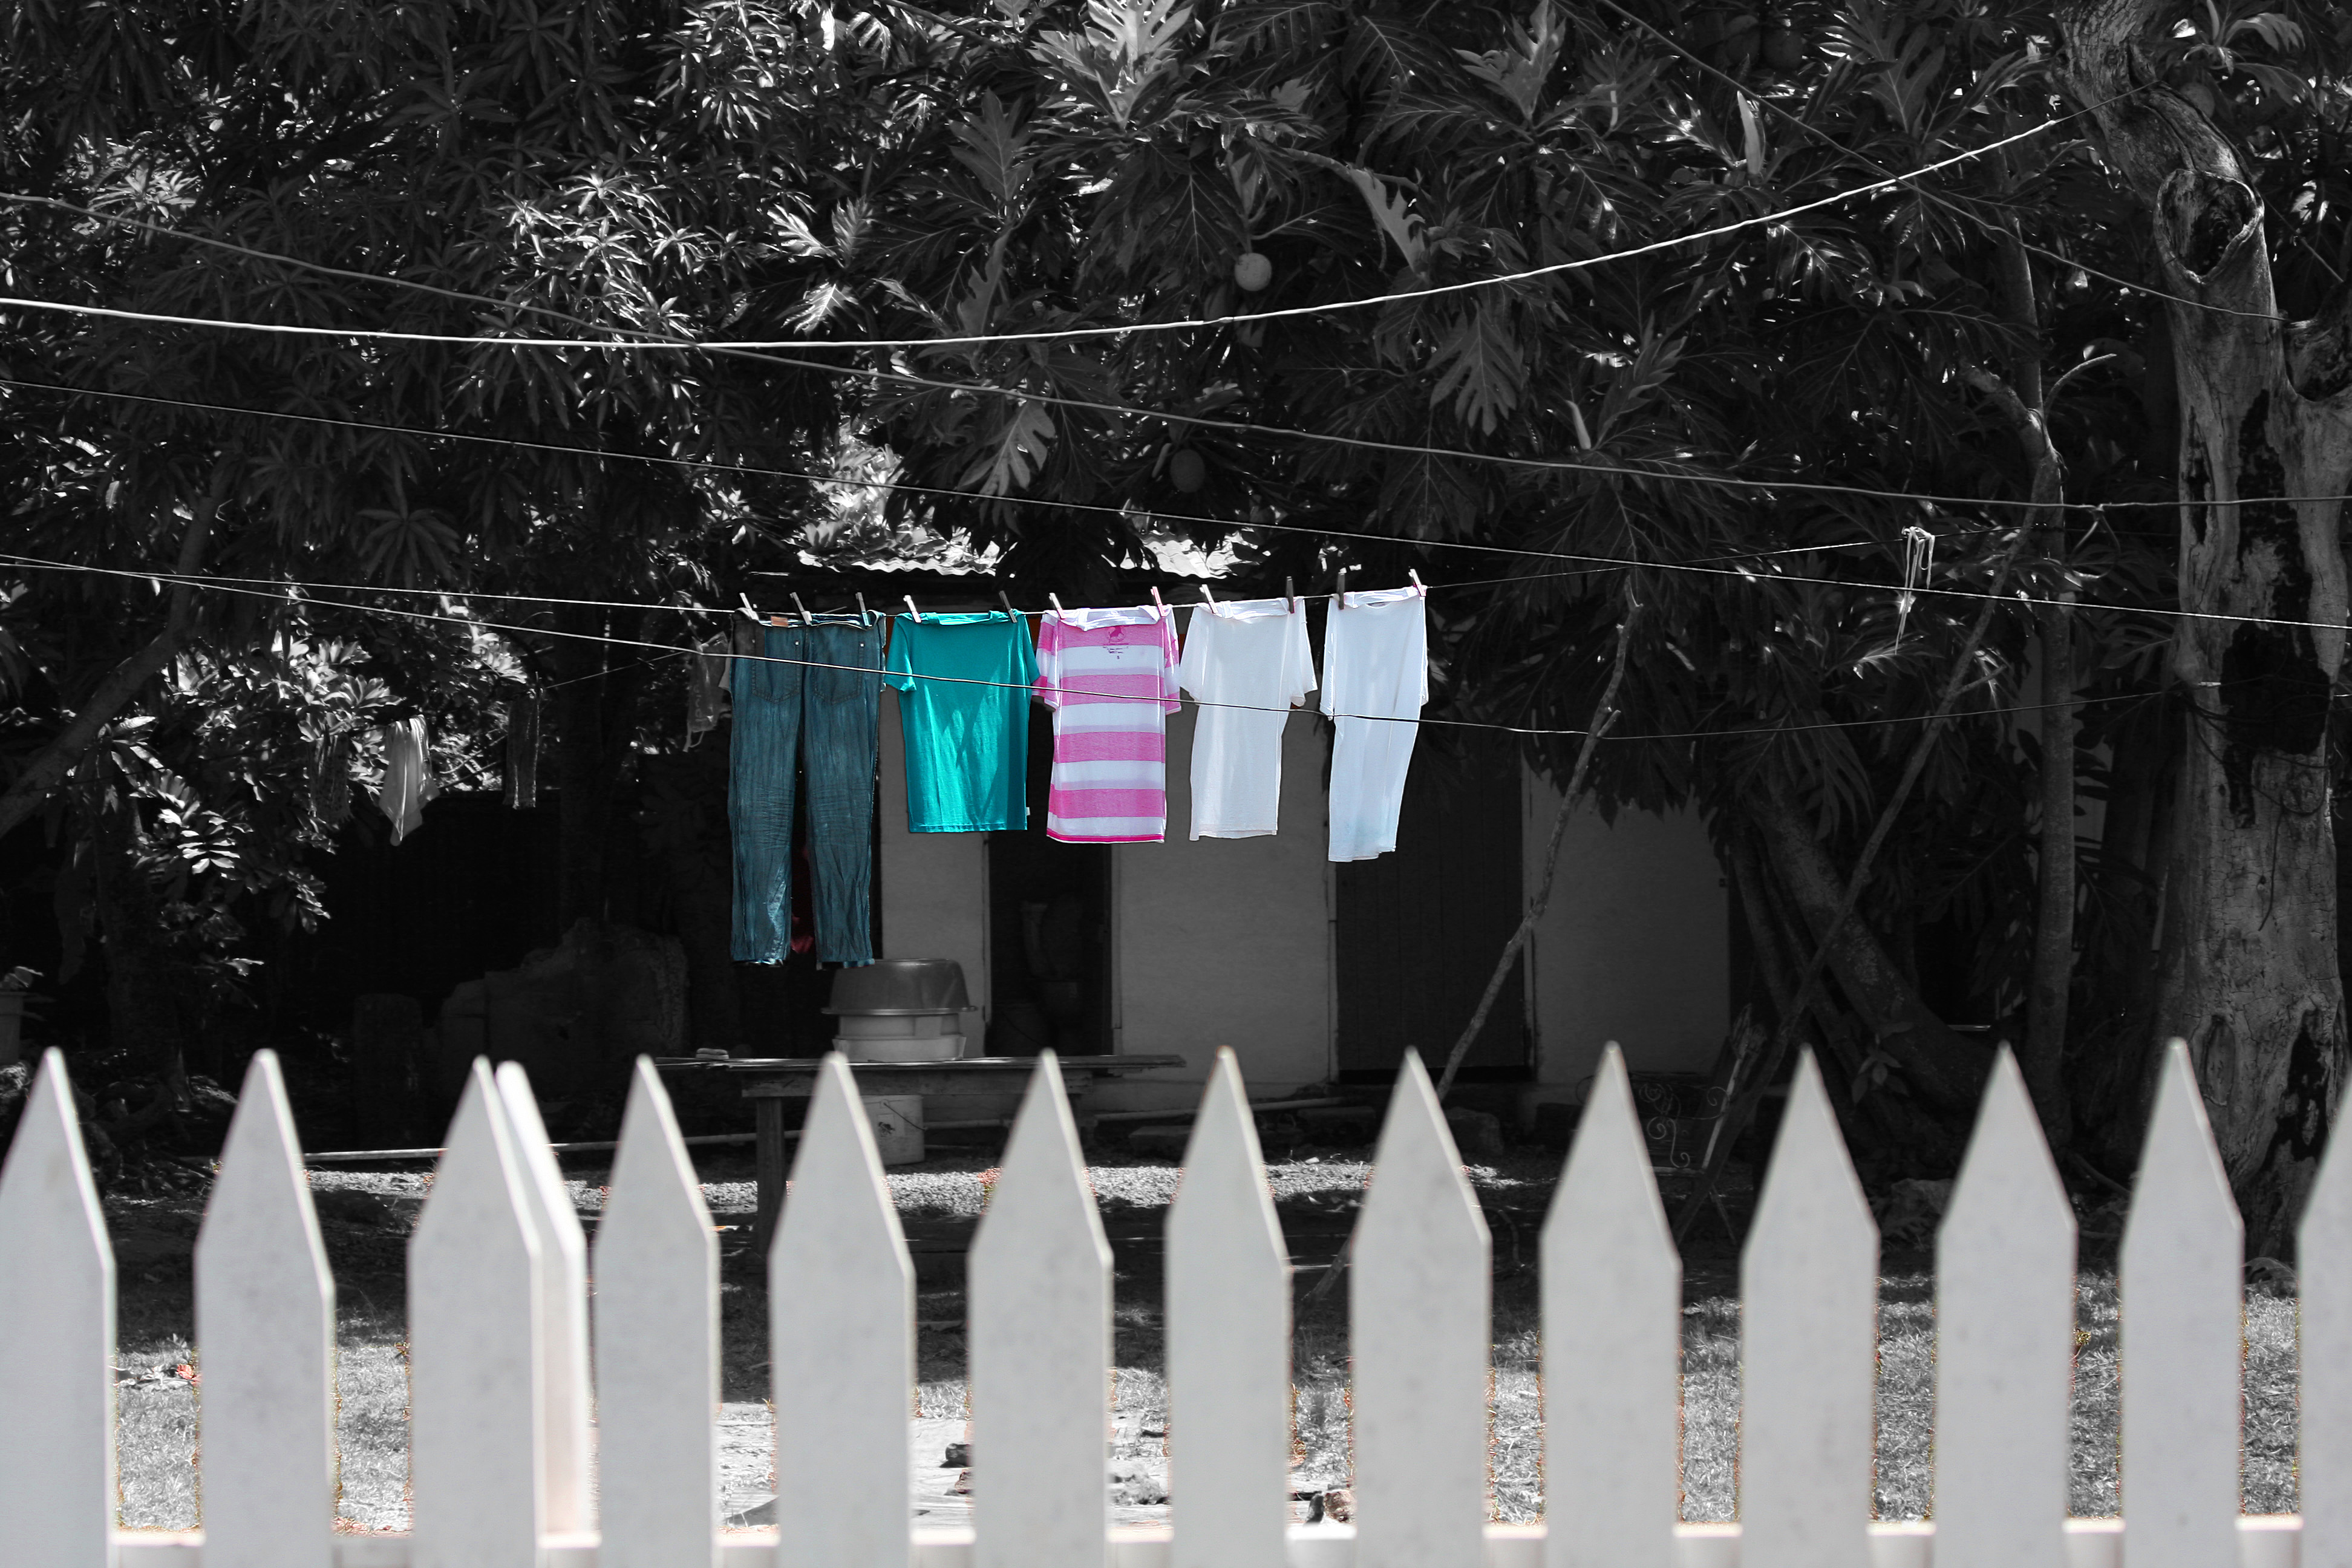 https://commons.wikimedia.org/wiki/File:Clothes_on_a_Clothes_Line_(7847509312).jpg